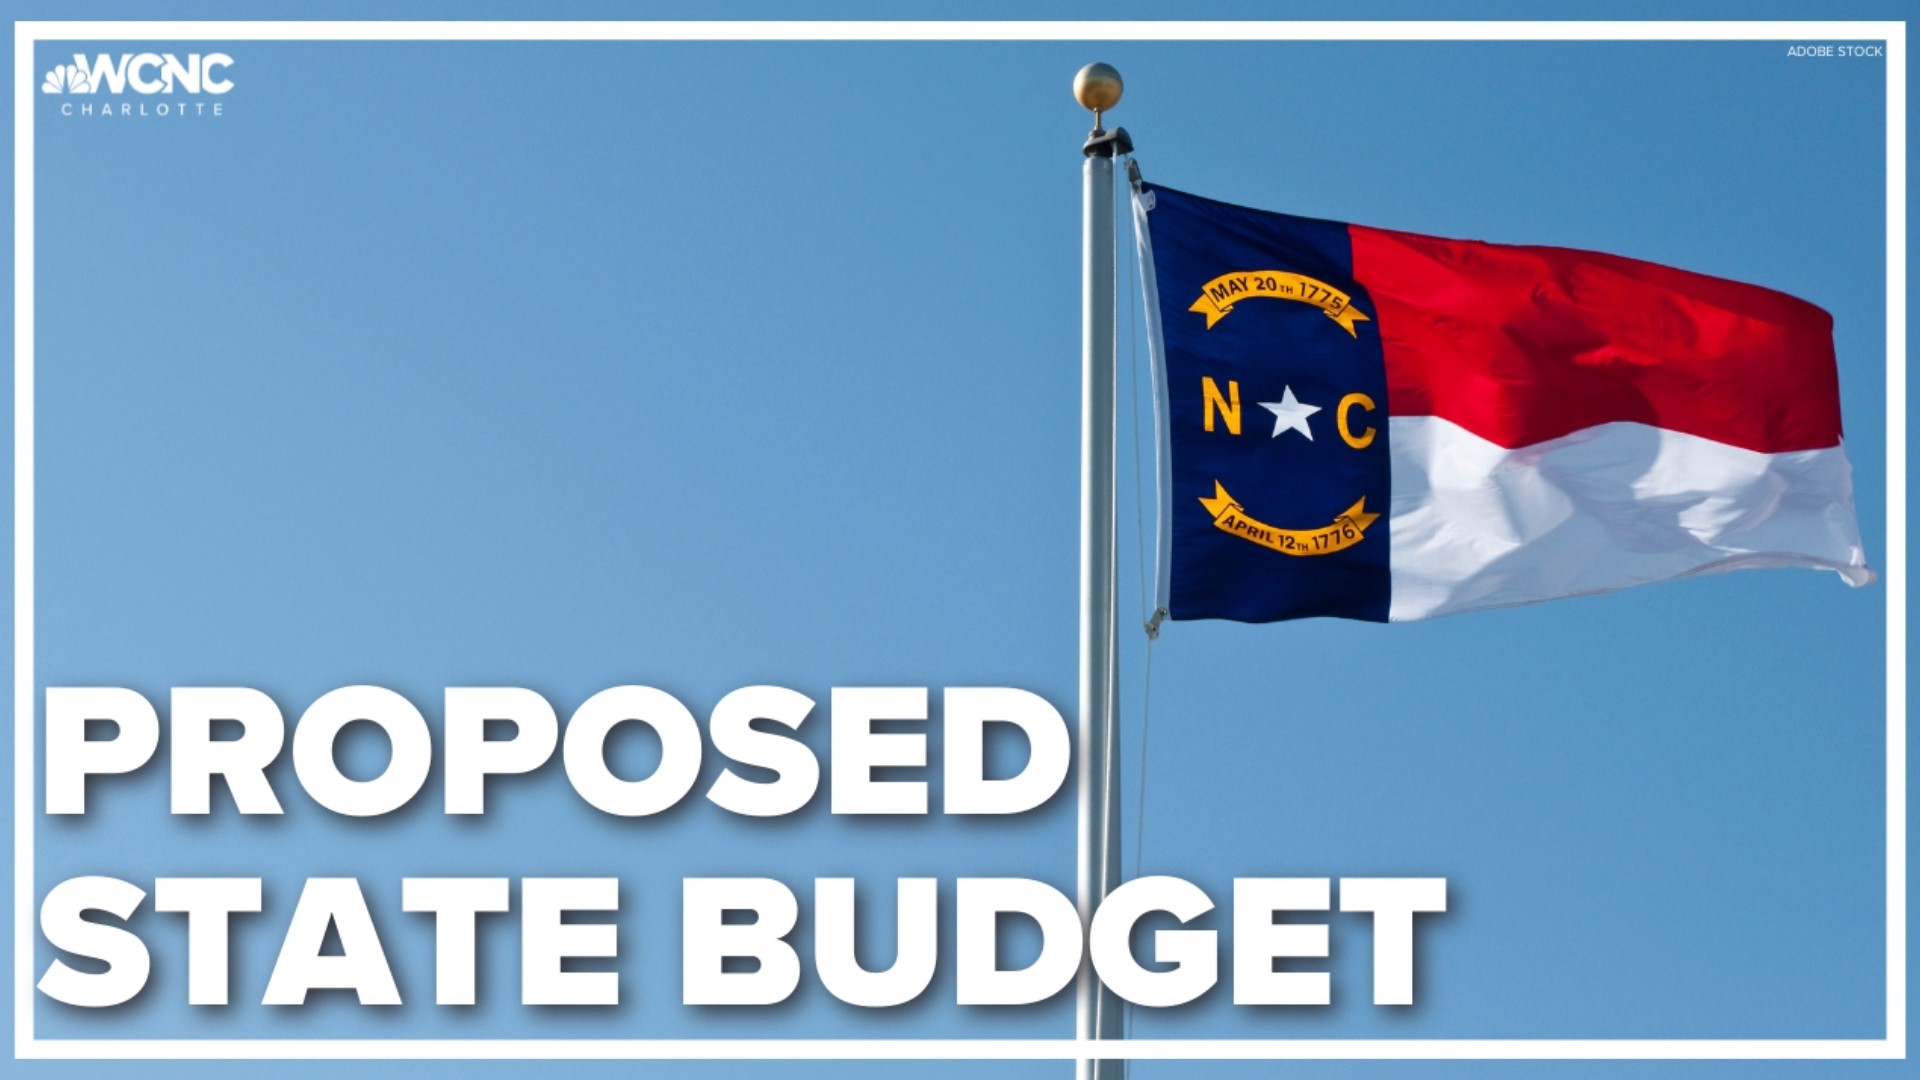 Gov. Roy Cooper wants to expand the state's budget by billions of dollars. The initial figure was $27 billion, but Cooper wants to increase that.